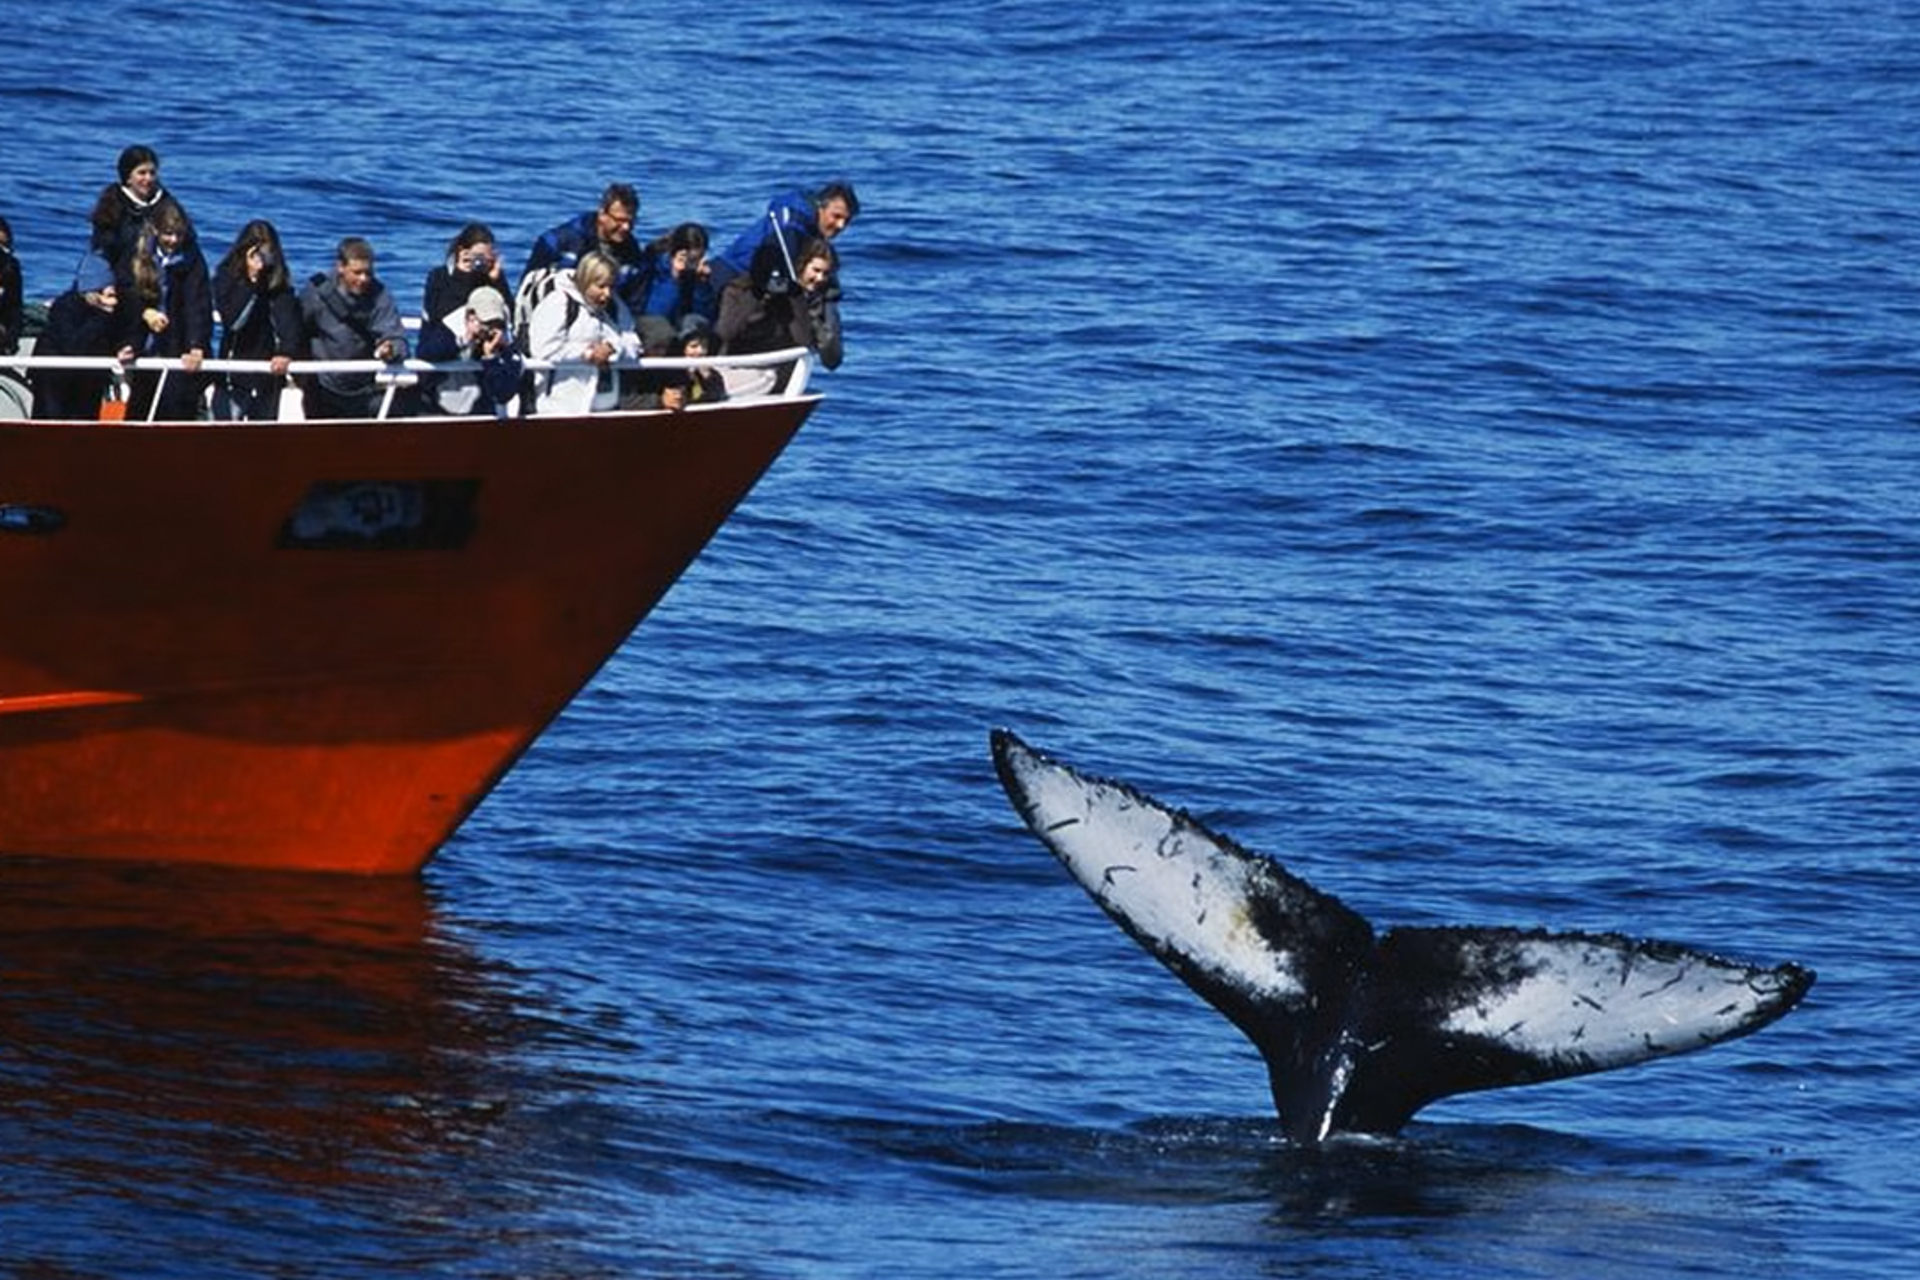 A group of whale watchers on a boat tour in Iceland